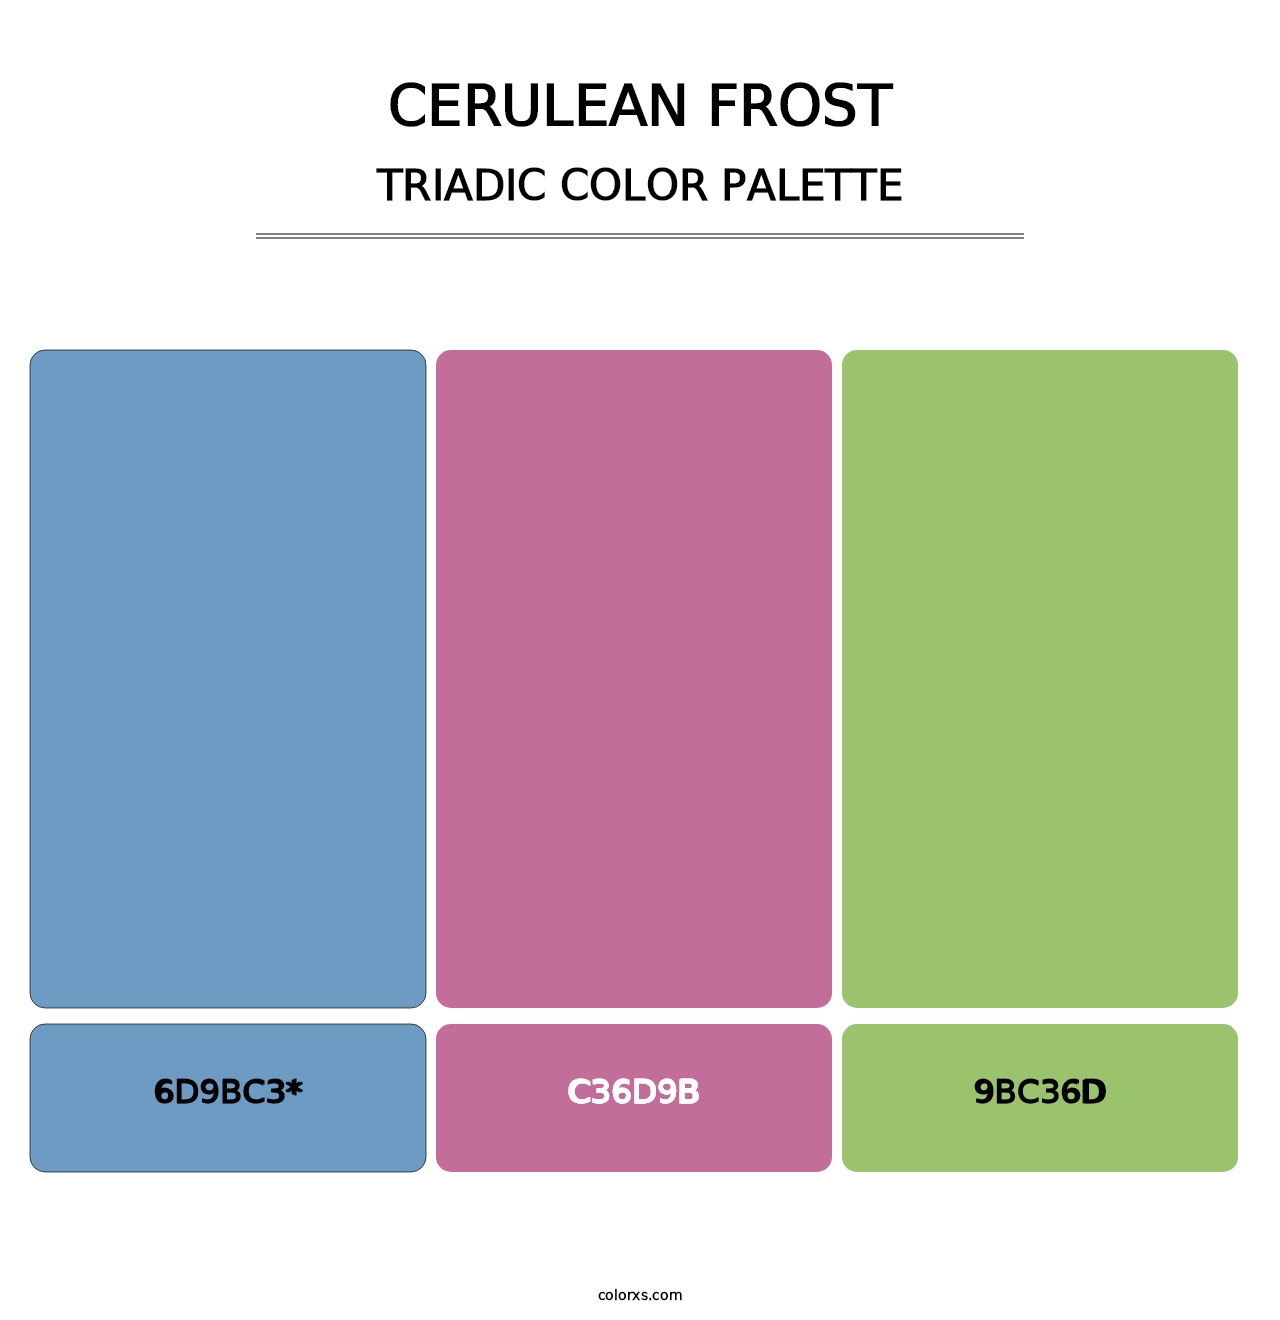 Cerulean Frost - Triadic Color Palette